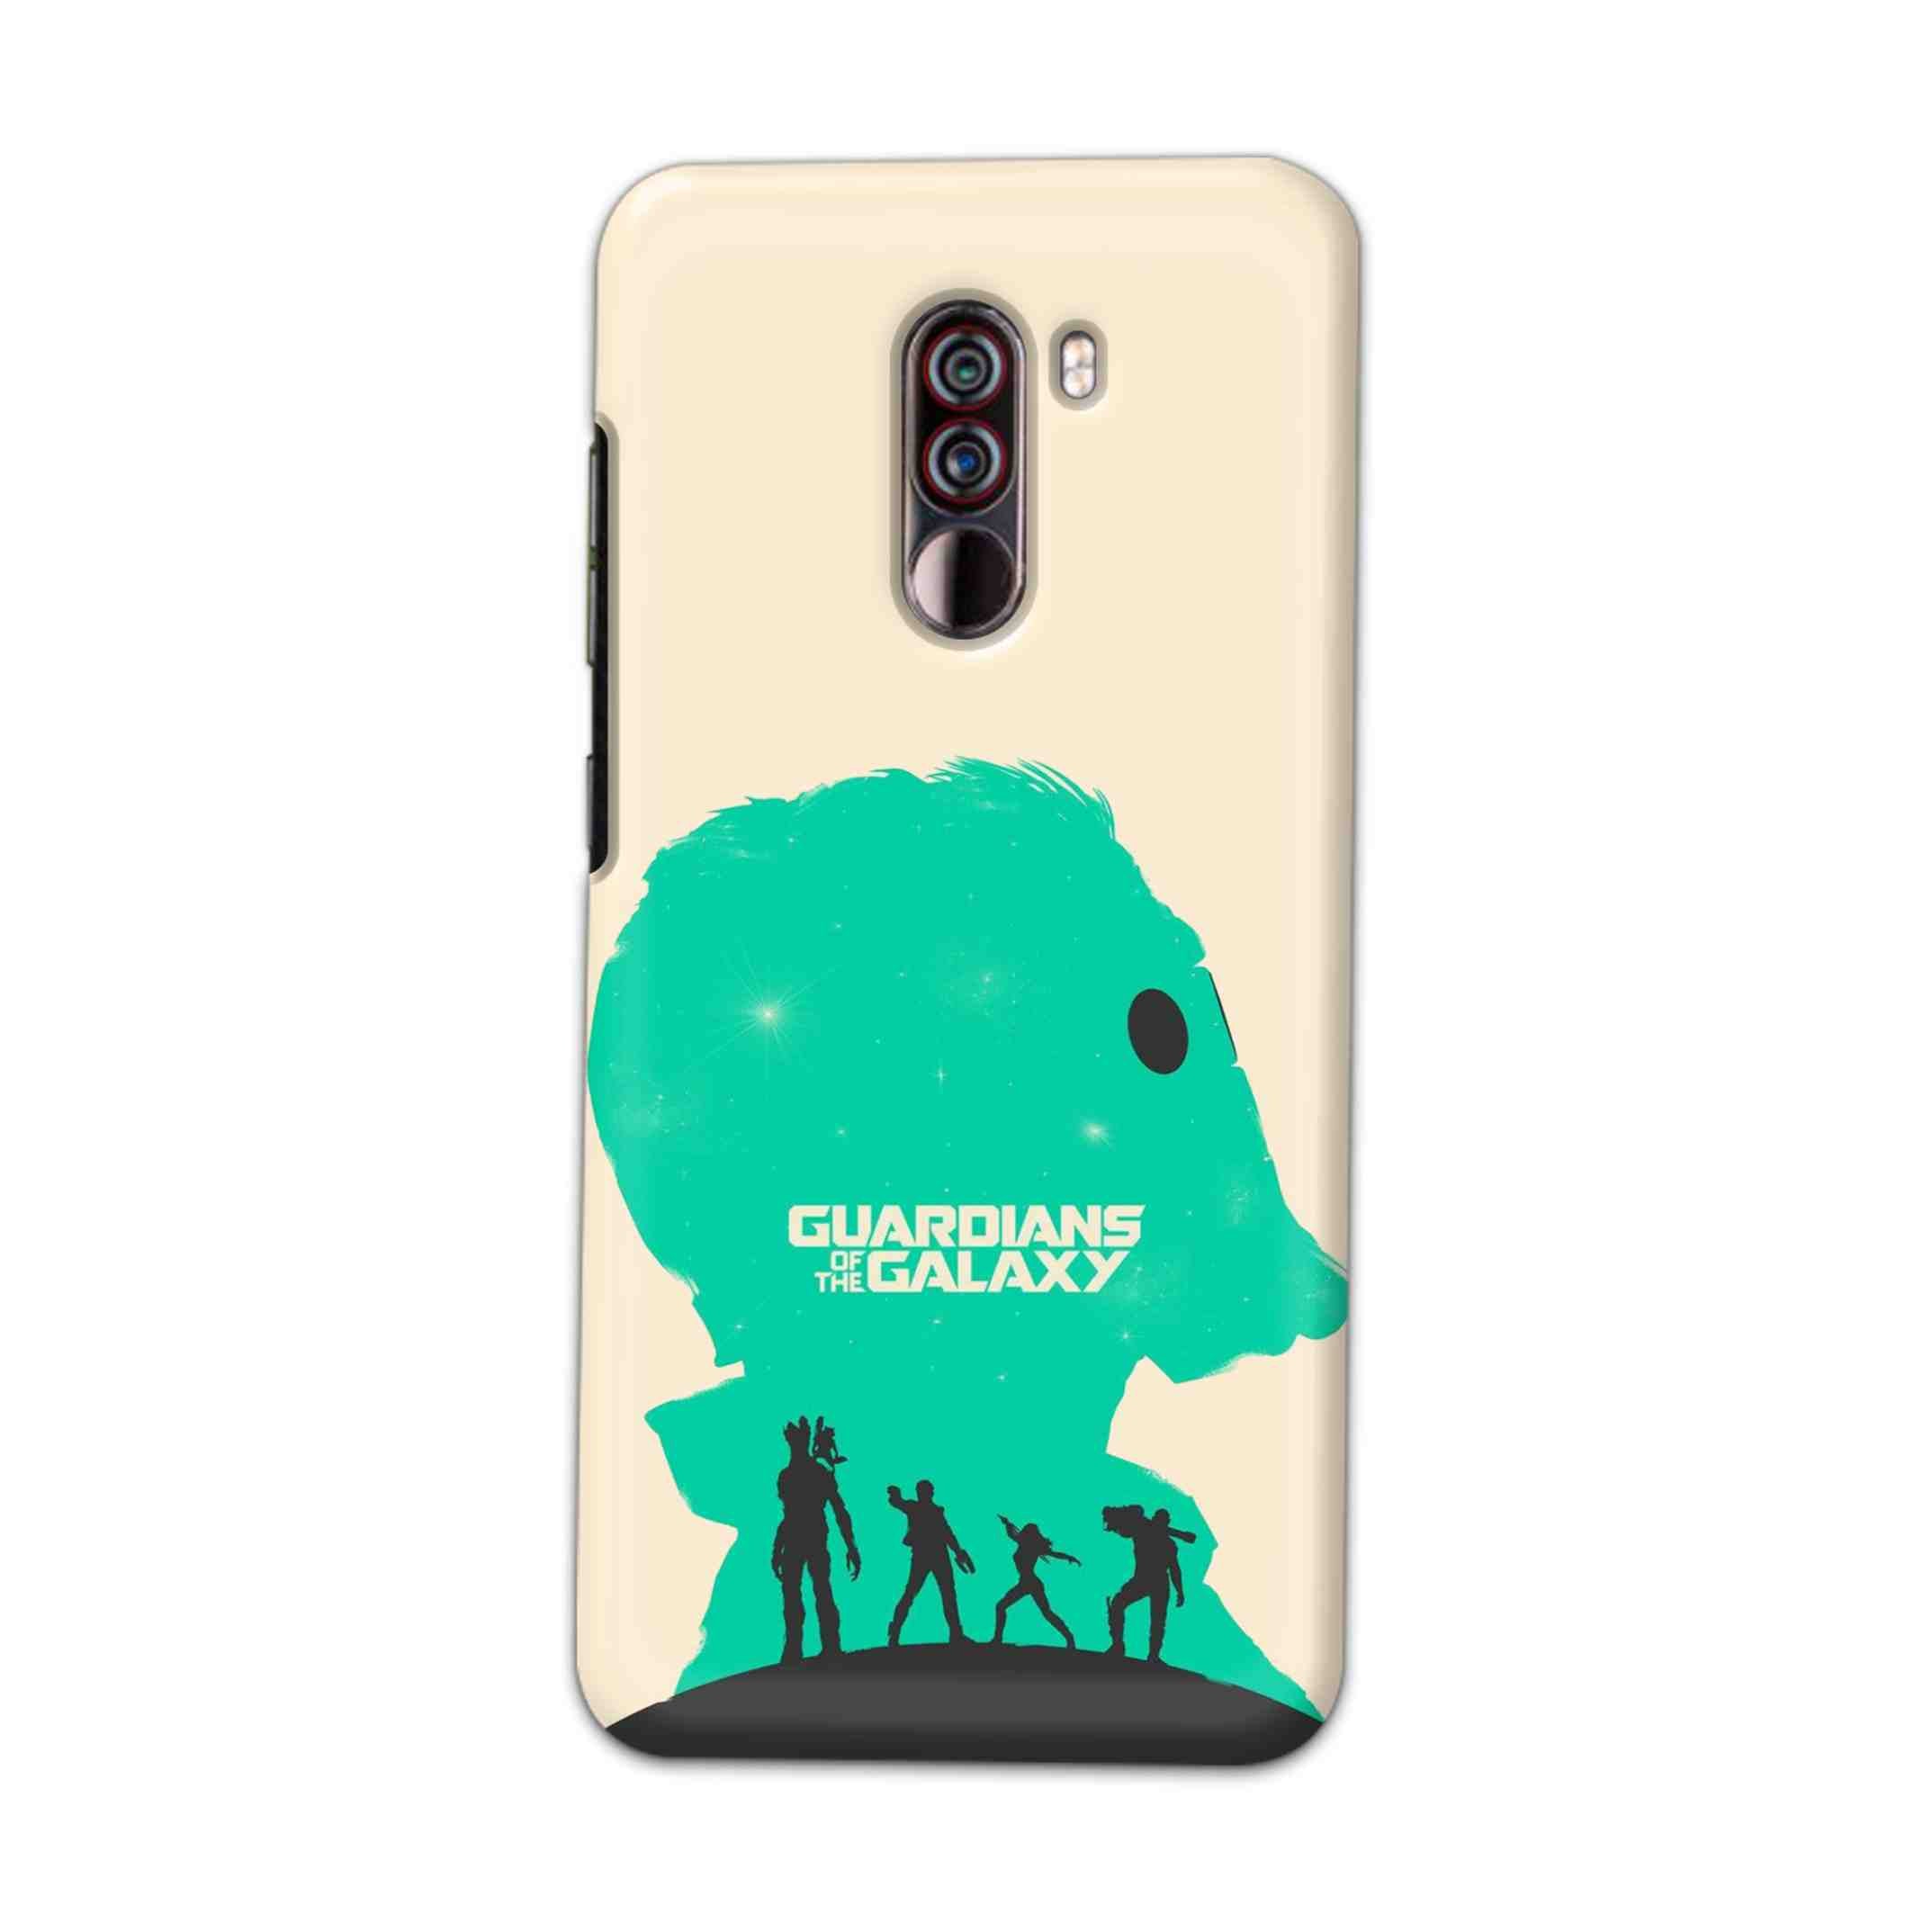 Buy Guardian Of The Galaxy Hard Back Mobile Phone Case Cover For Xiaomi Pocophone F1 Online